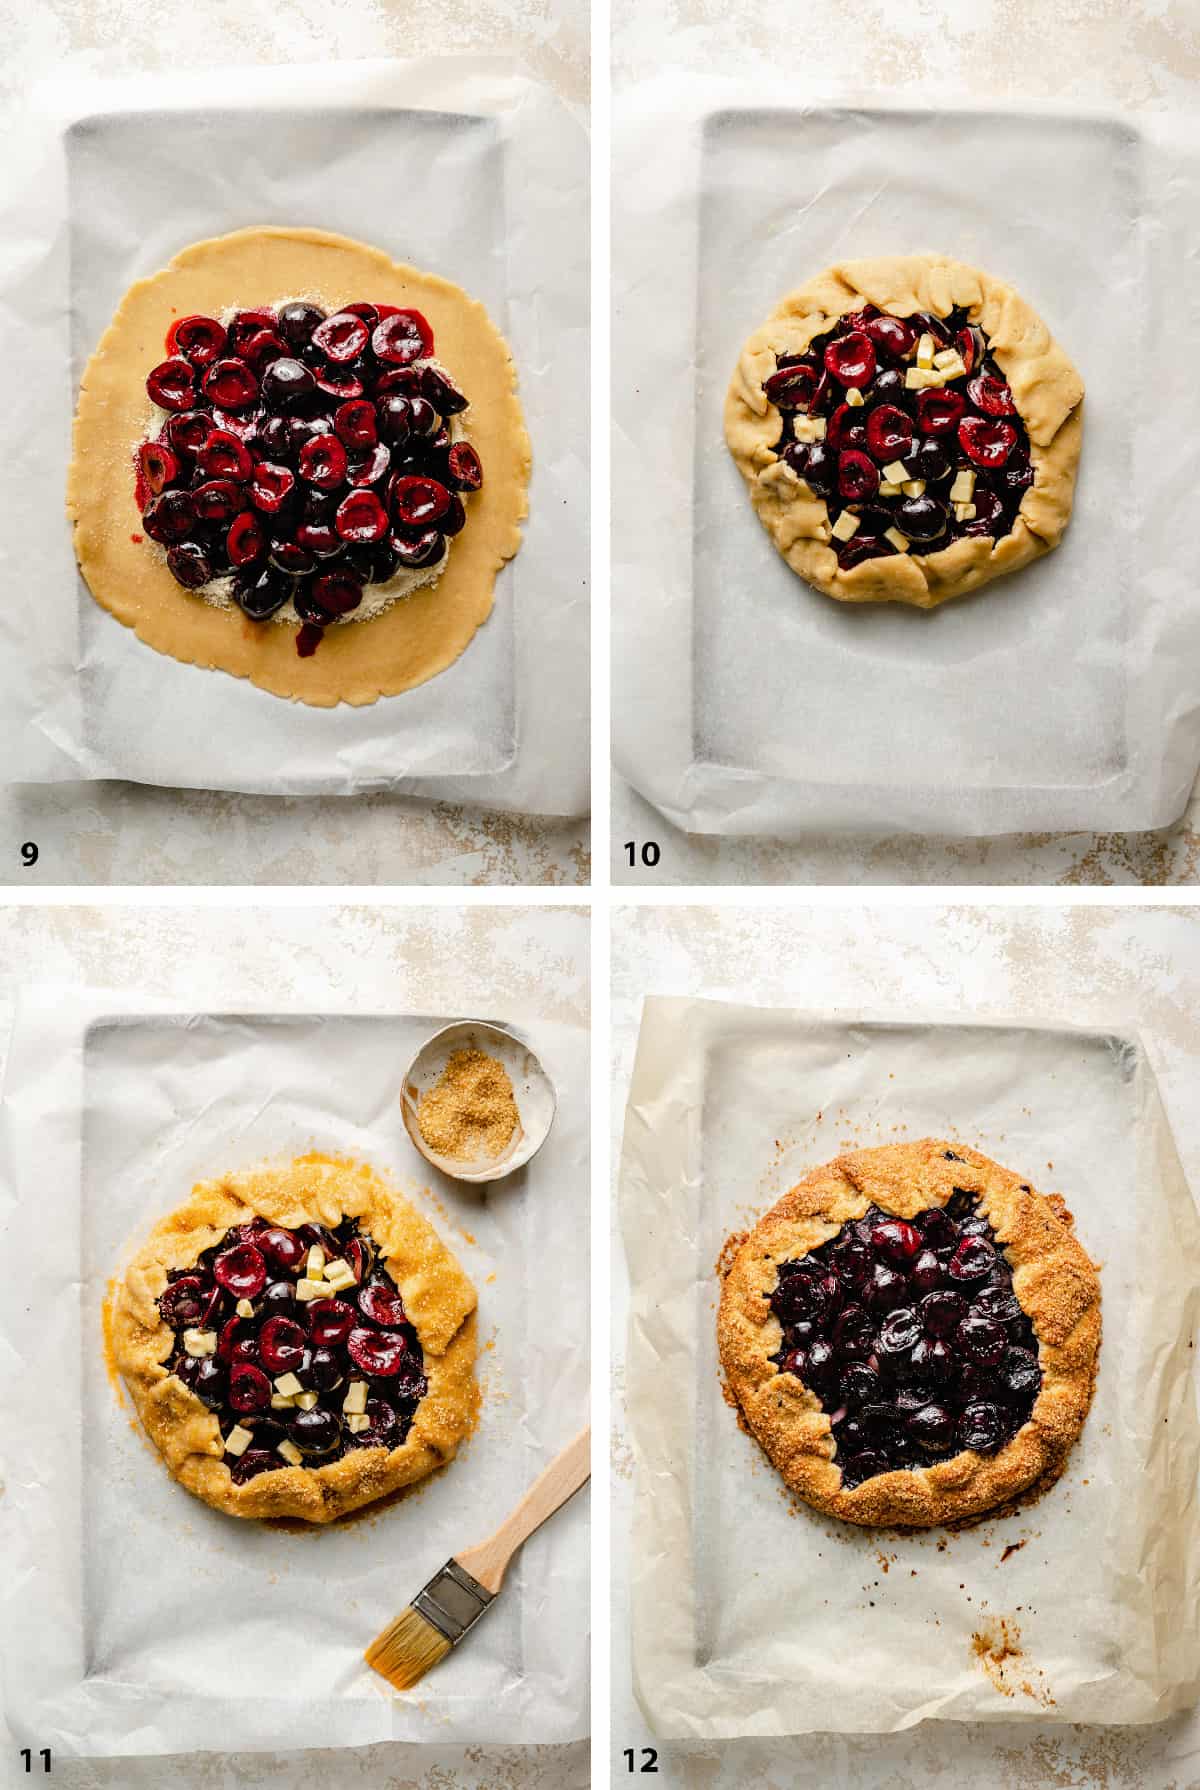 Steps of adding the cherry filling, topping with butter, glazing and sugaring and baked galette.